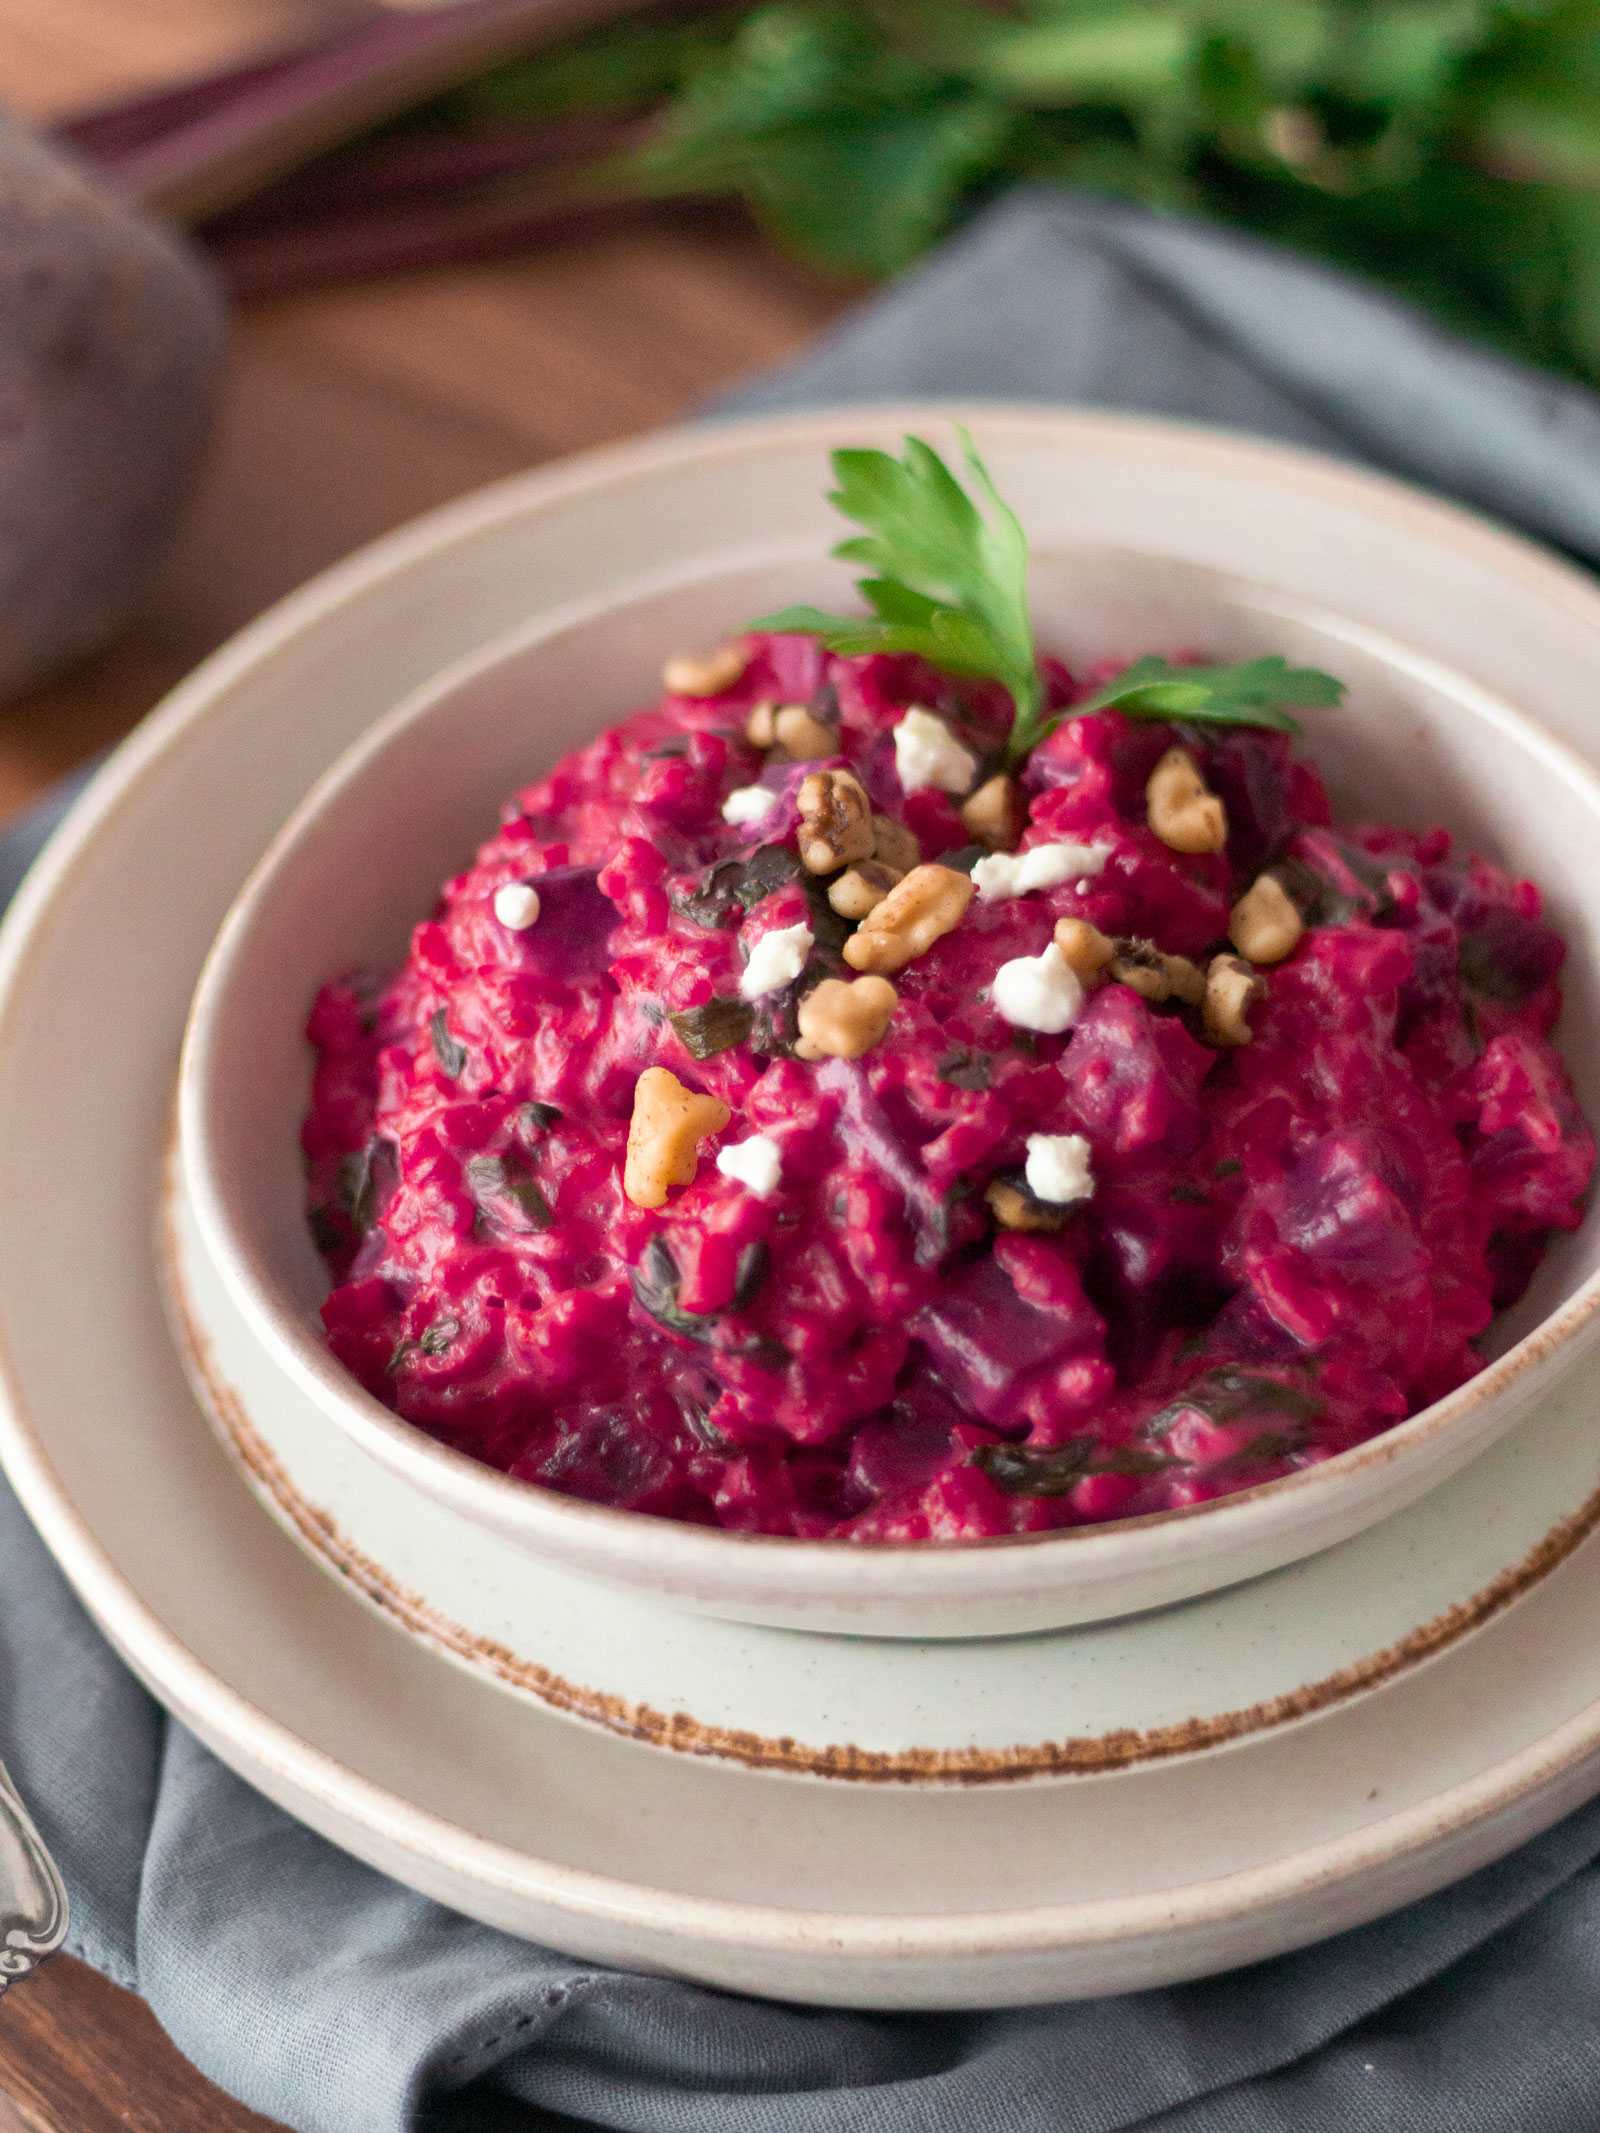 Oliver's Beet & goat cheese risotto is vibrant and bursting with flavor. You will discover a hint of sweetness from the beets, complimented by the sharpness from the goat cheese. 